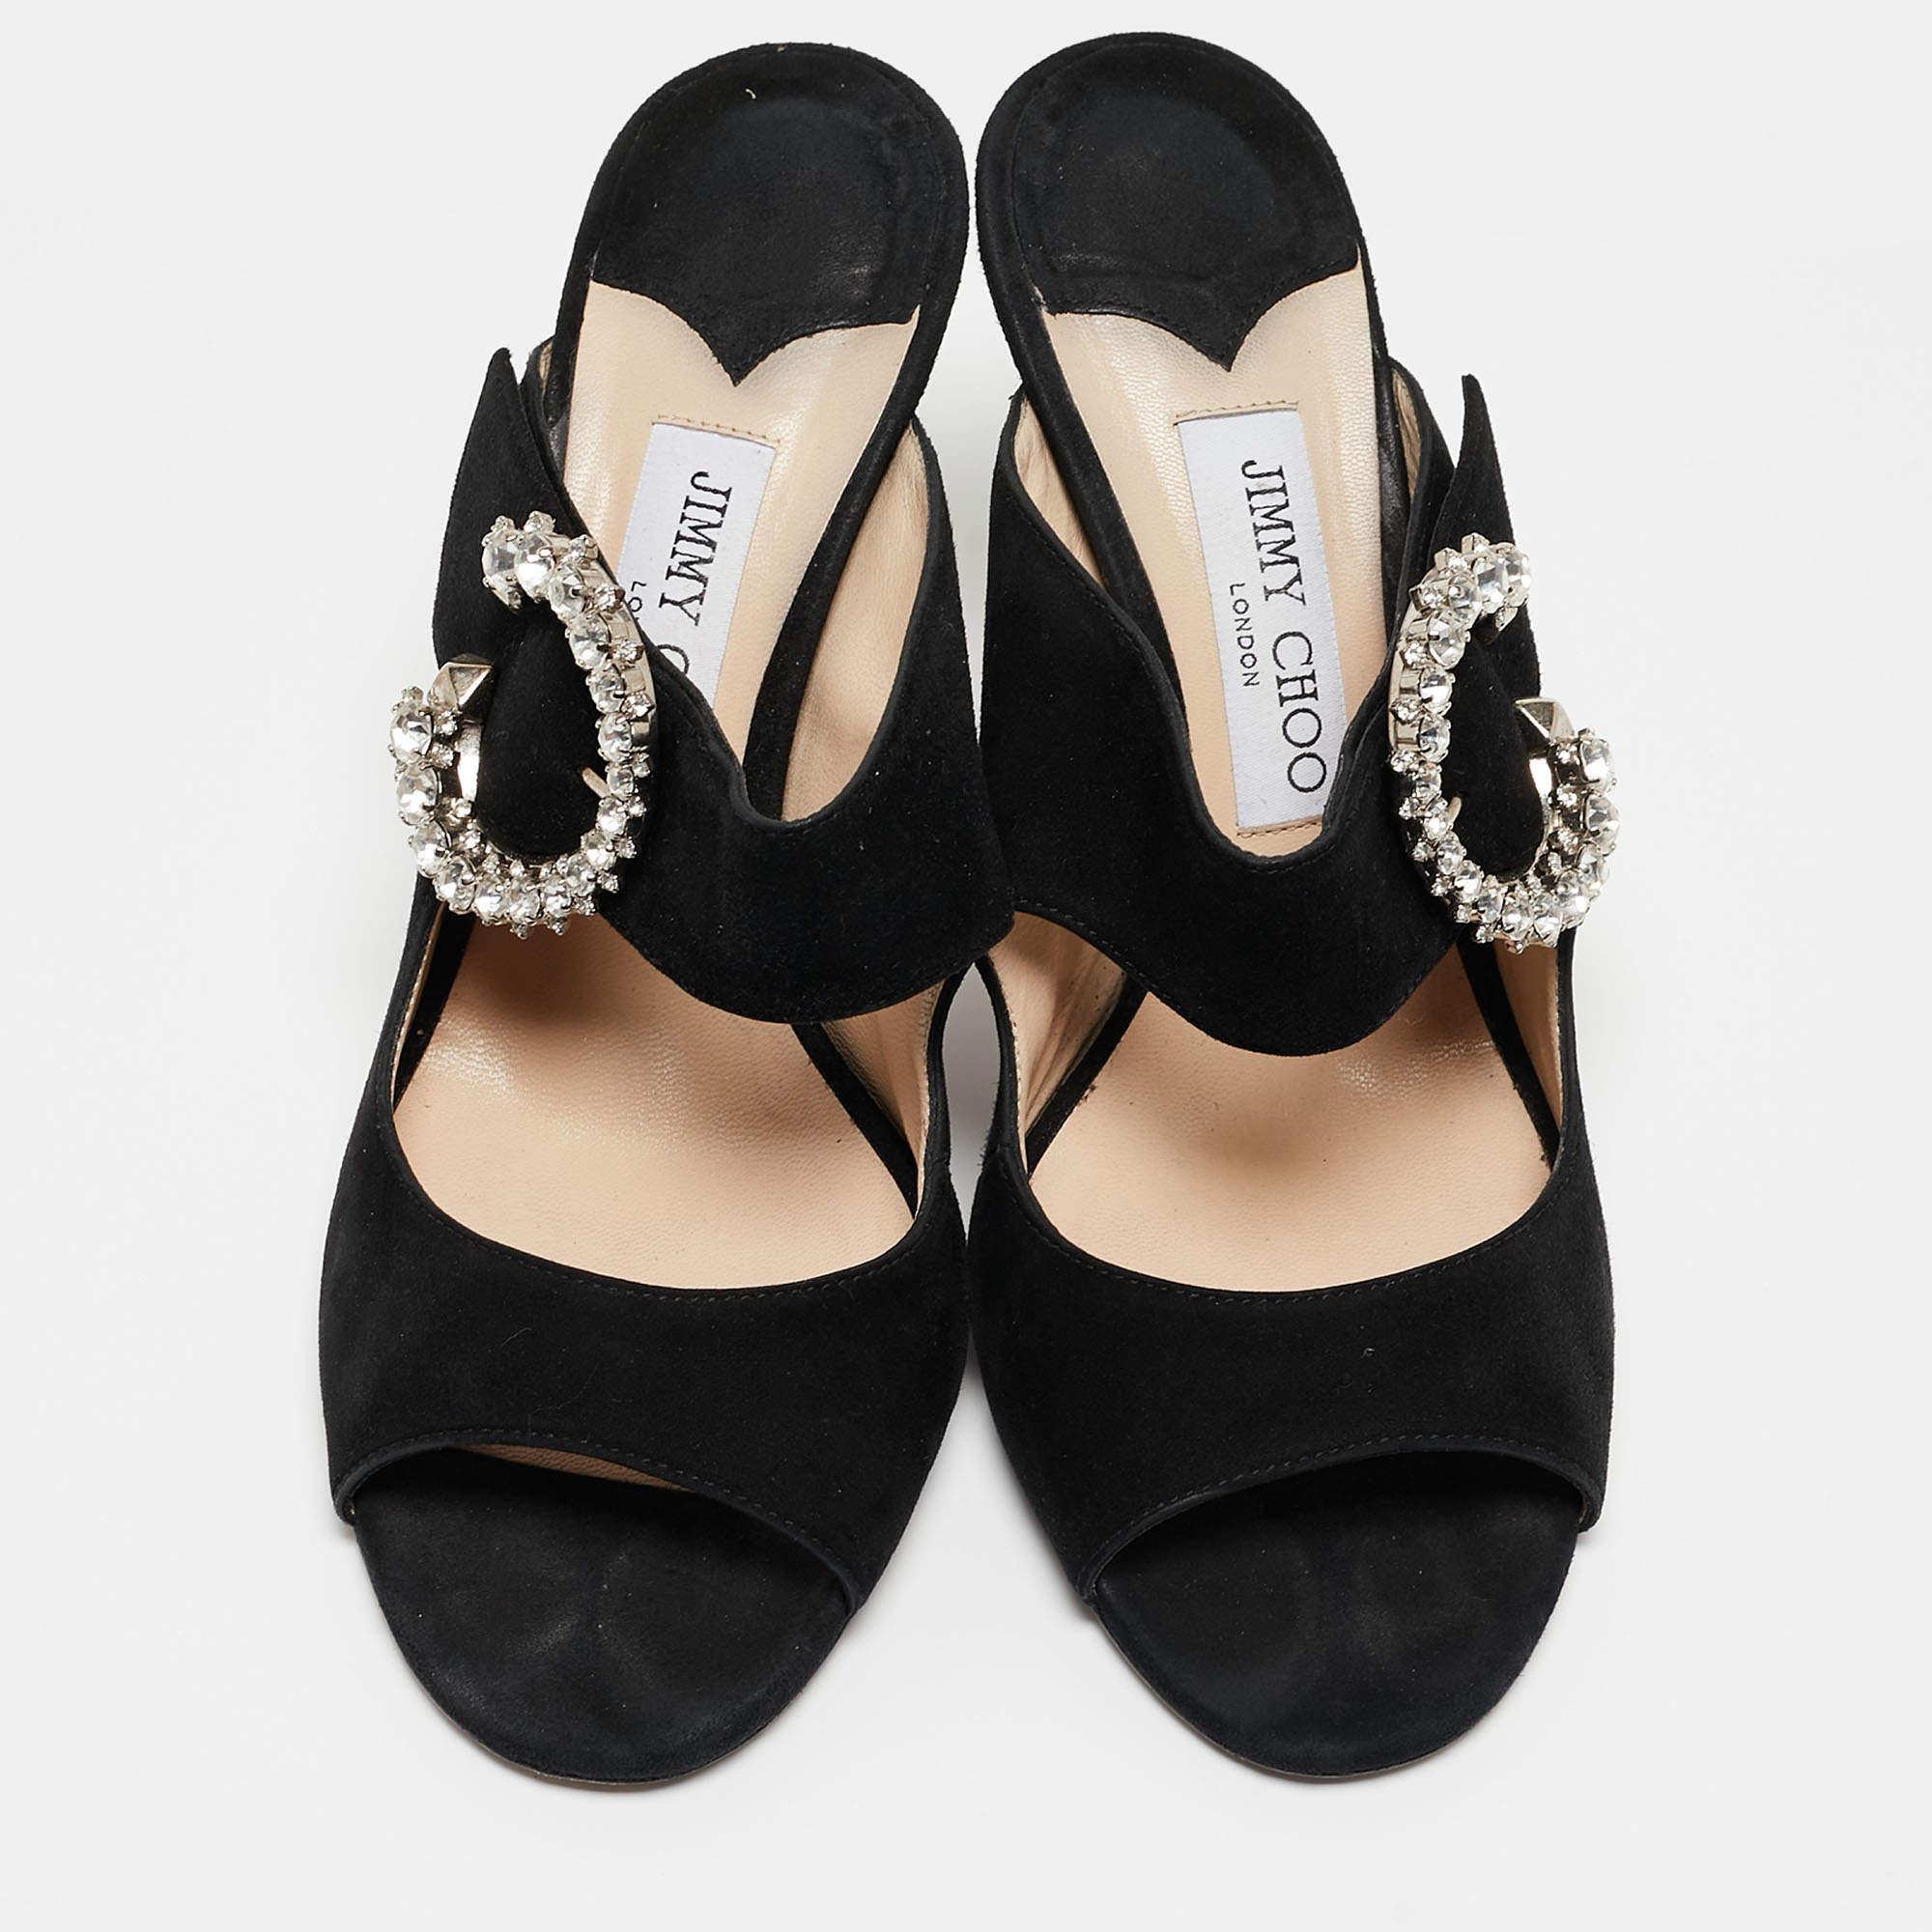 Flaunting a dainty crystal-embellished buckle on the beautiful black suede exterior, these flawless Saf sandals provide your feet with a glamourous style. These slide sandals from Jimmy Choo strike a perfect balance between luxury and simplicity. To